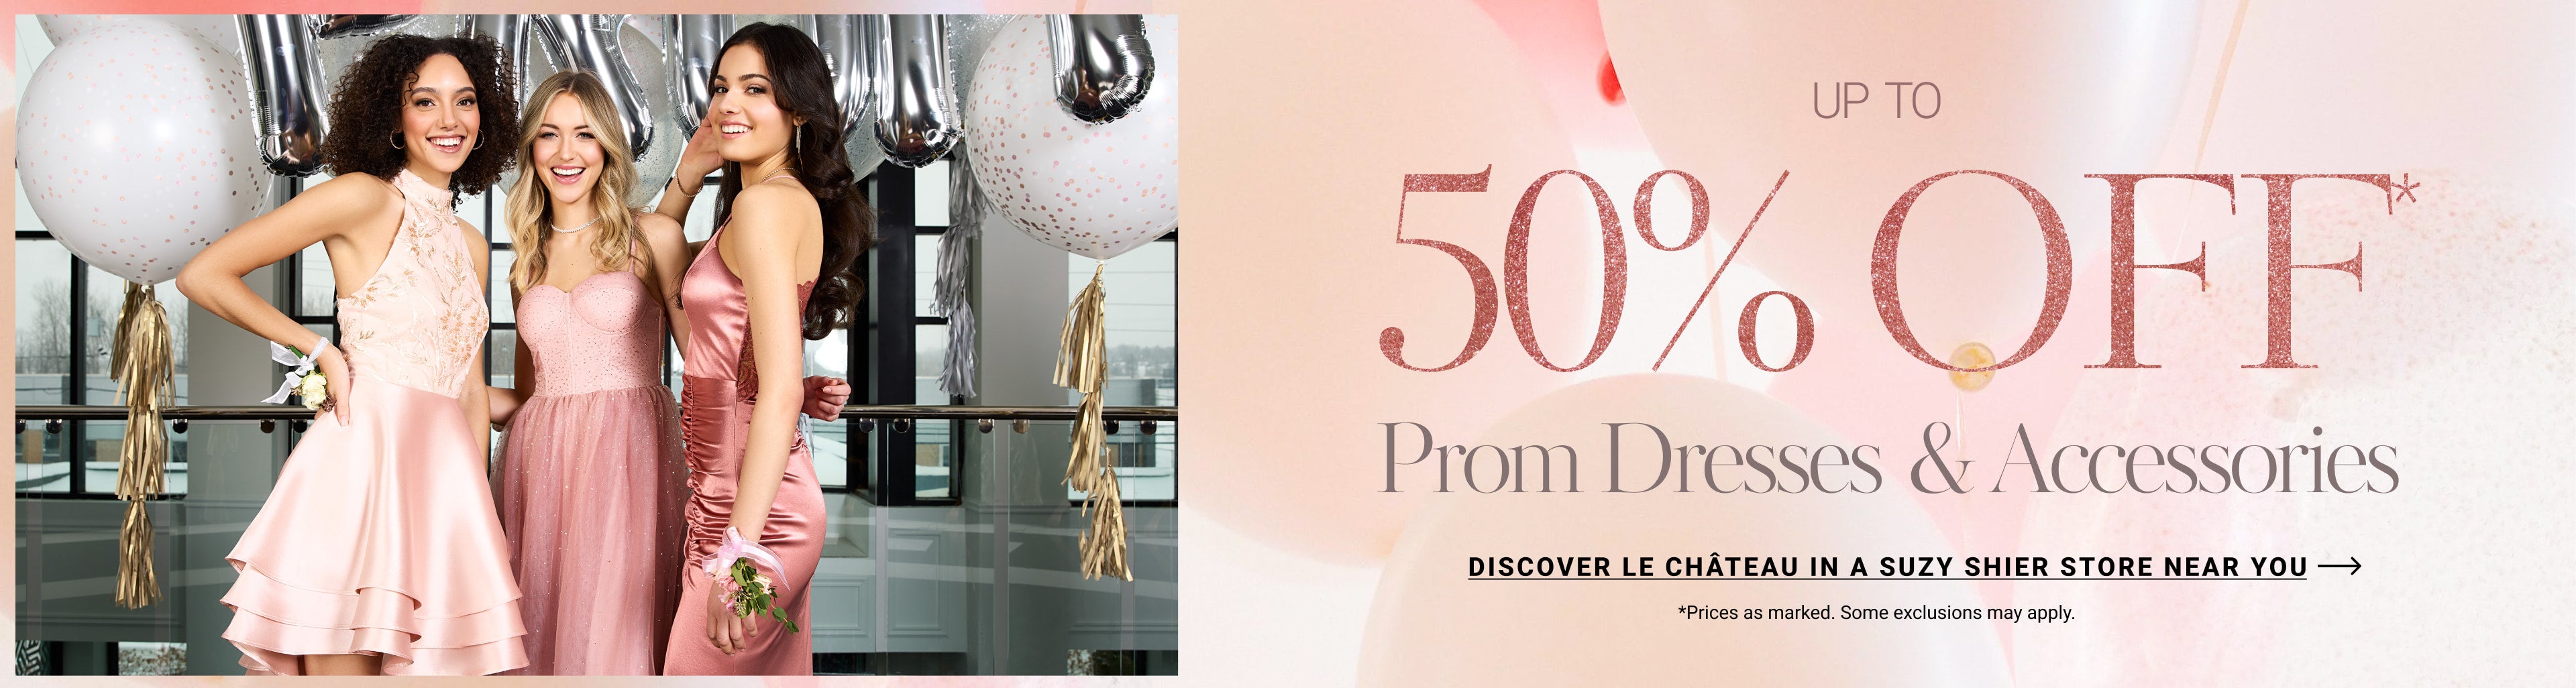 up to 50% off prom dresses and accessories